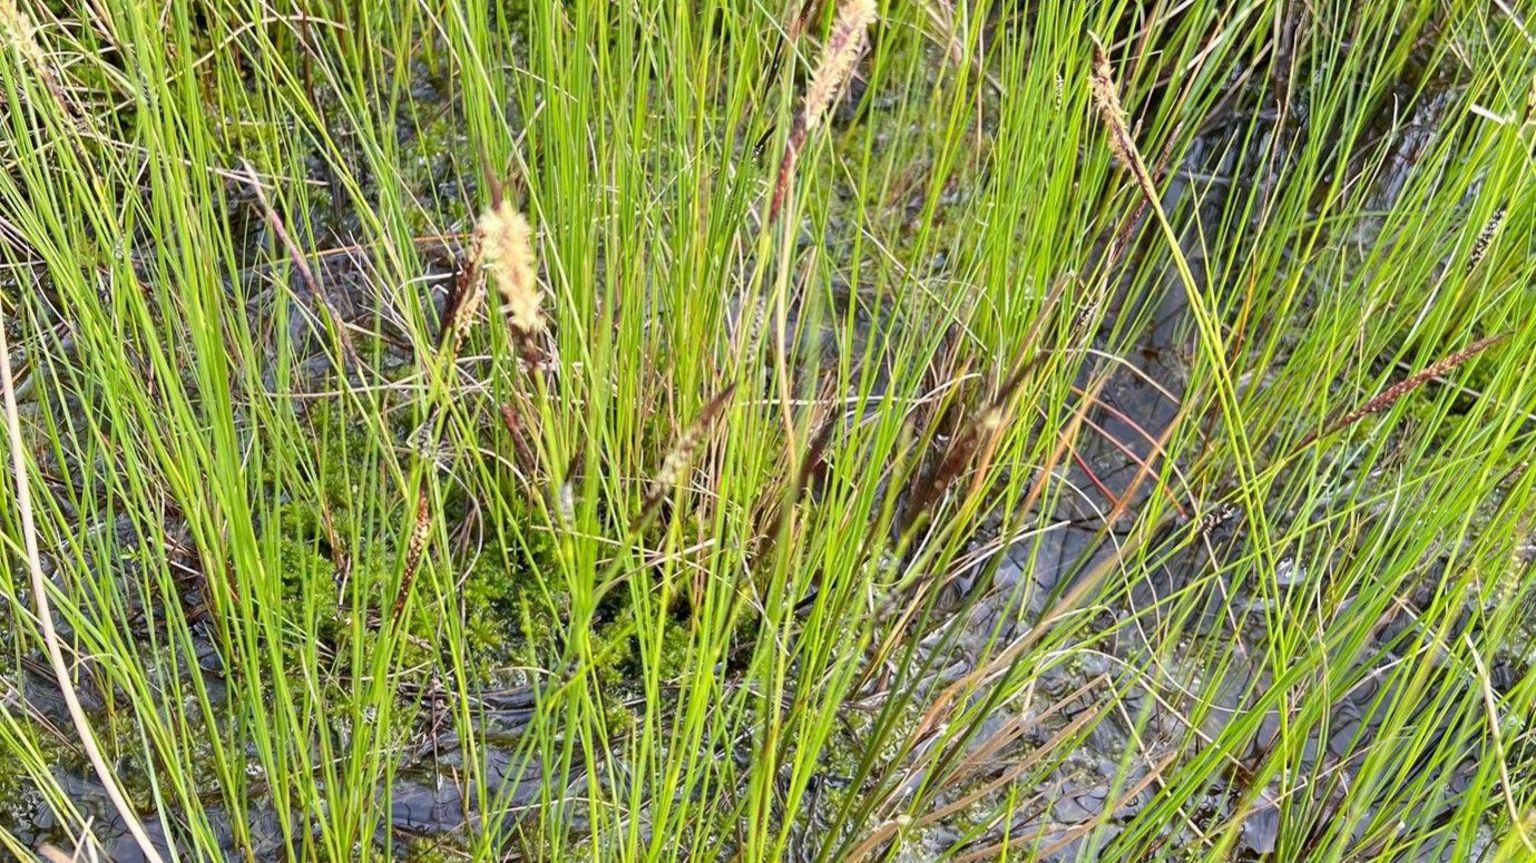 Grass-like plants called sedge in water